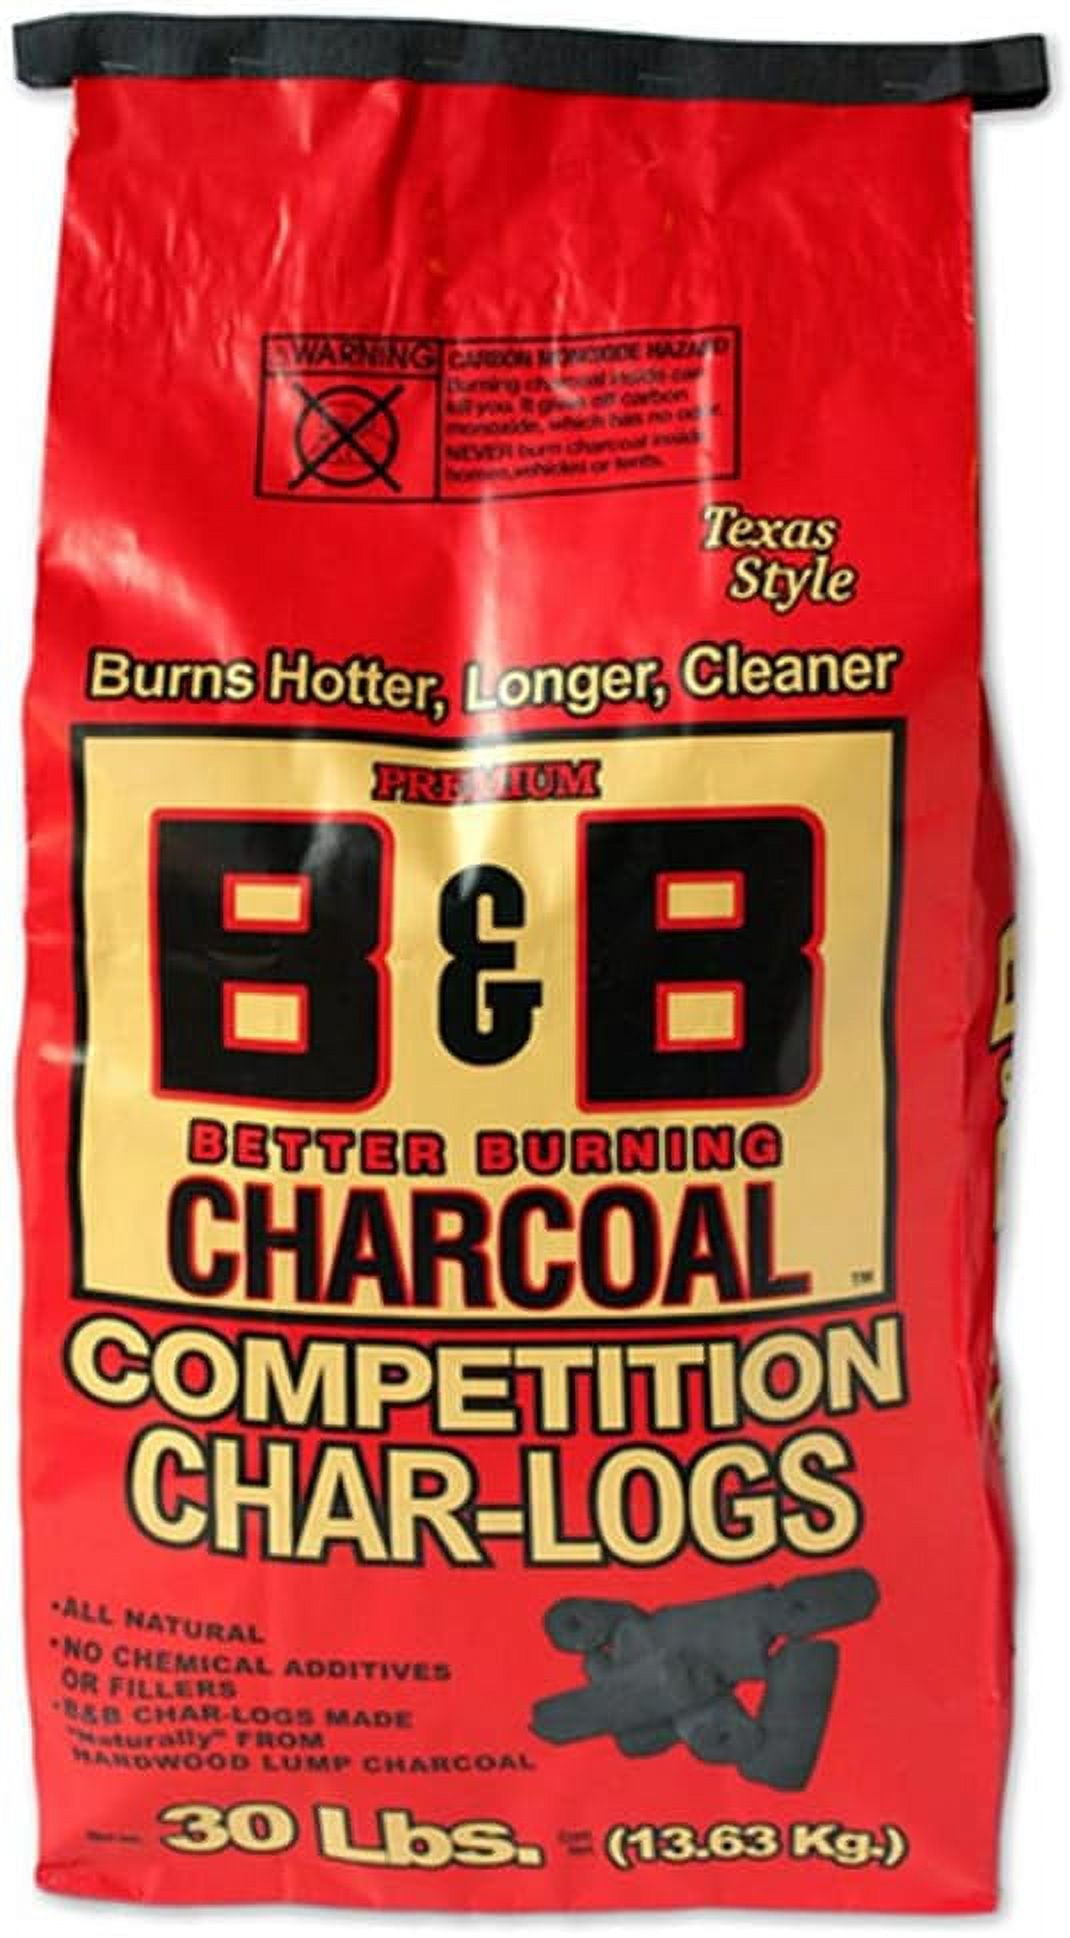 B&B Charcoal 00106 Competition Char-logs Charcoal Briquettes, 30 Lbs - Set  of 4